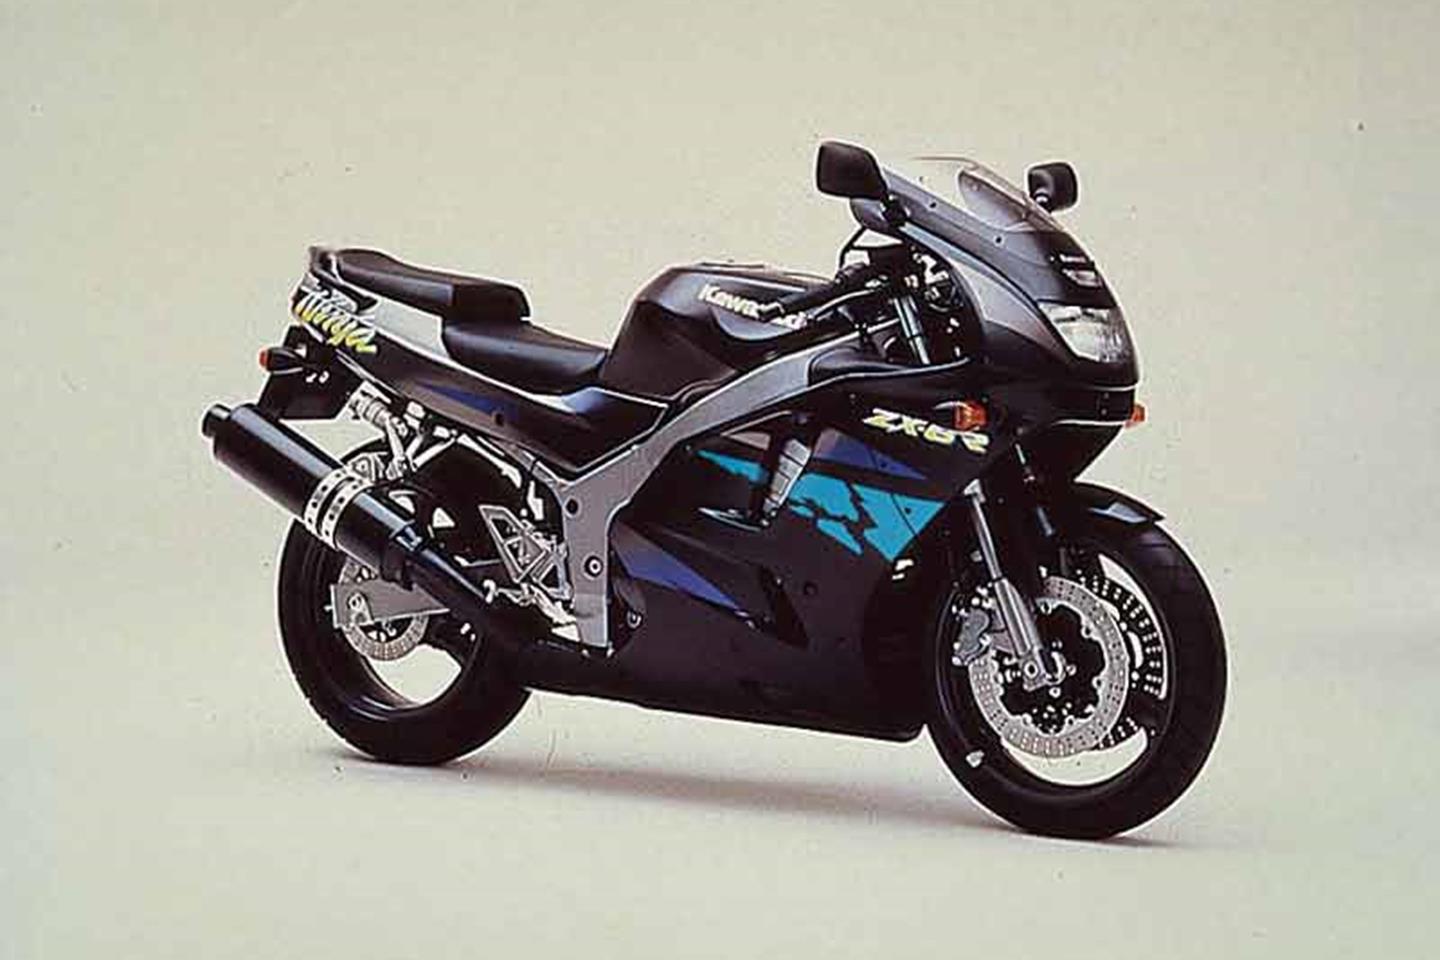 KAWASAKI ZX-6R (1995-1997) Review | Speed, Specs & Prices